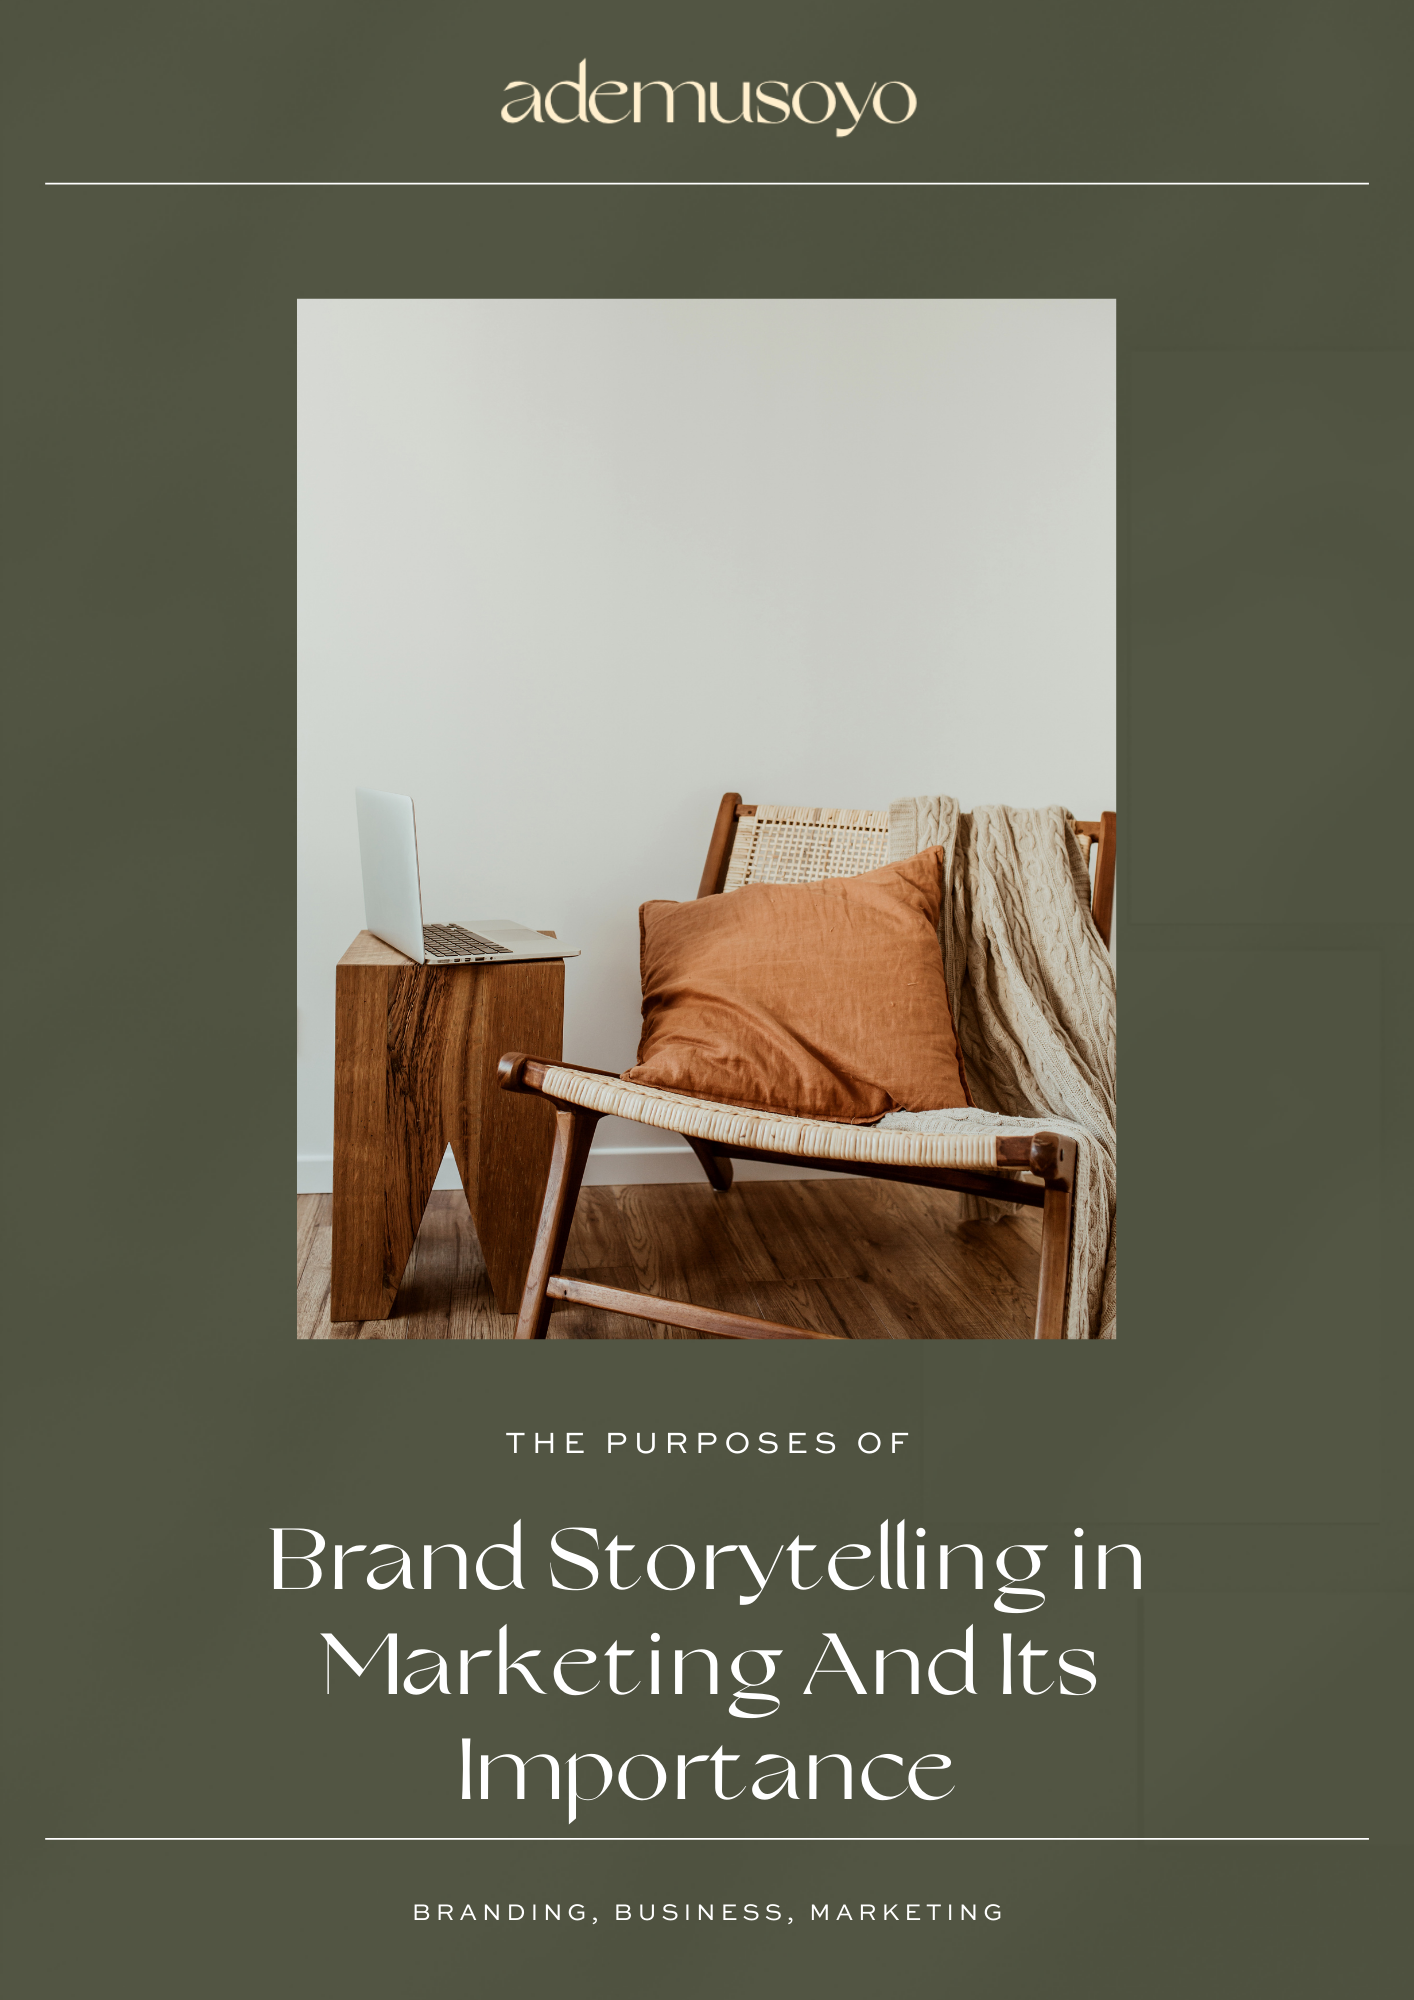 blog cover image for a post about the purposes of brand storytelling in marketing and It's Importance